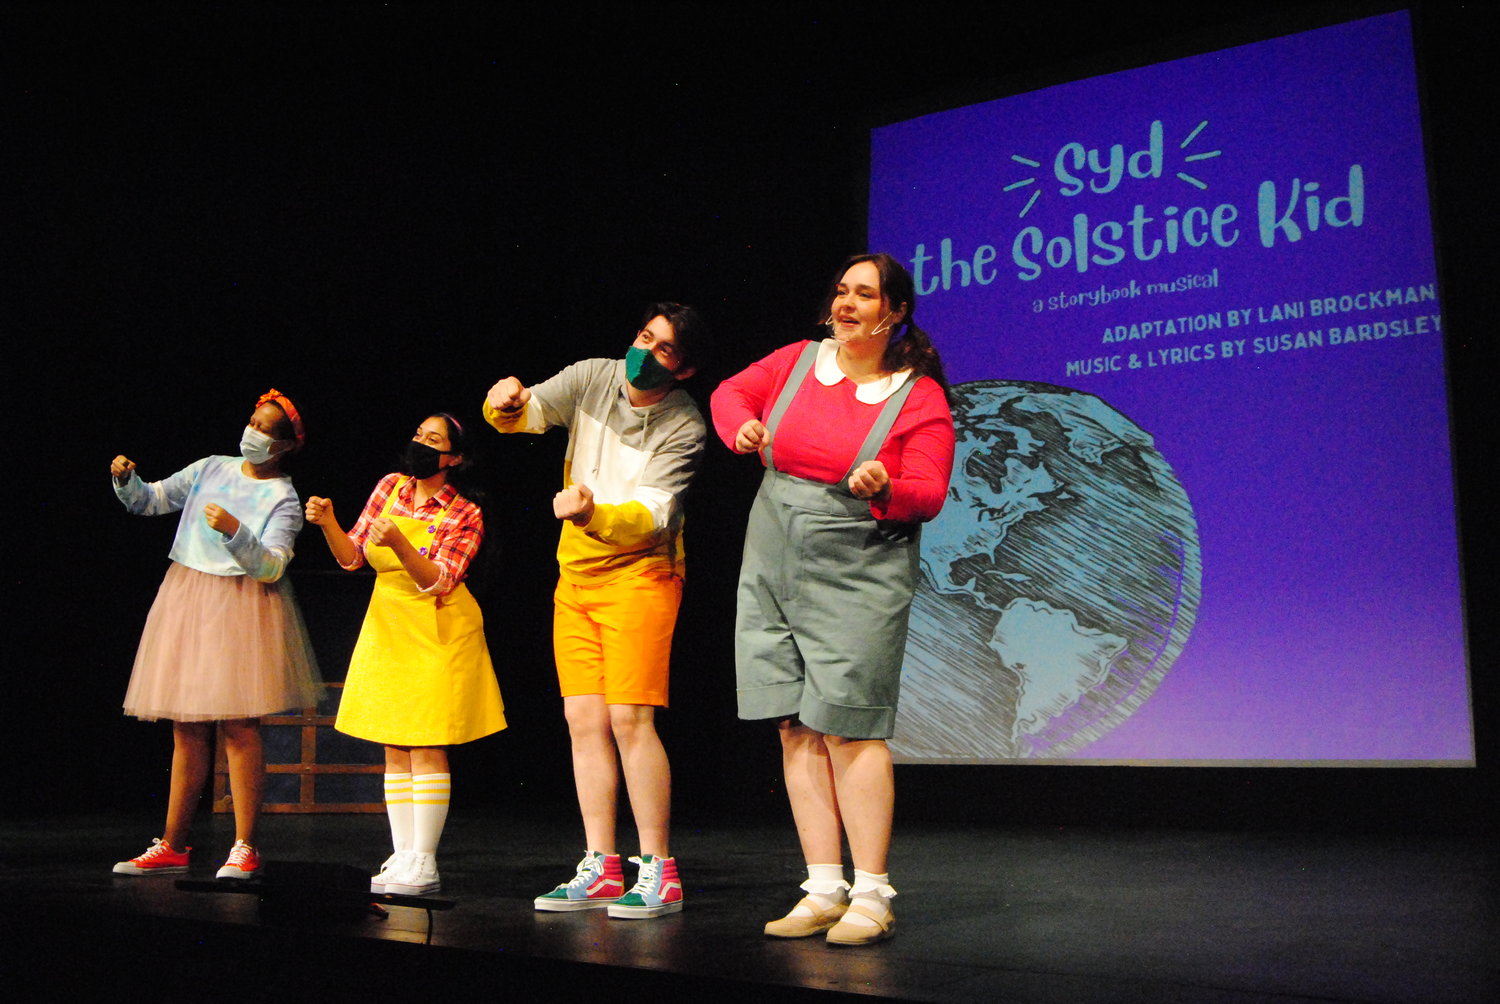 Left to right are NMSU Theatre Department student actors JJ Hanley (“Deonn”), Dominique Gomez (“Syd”),  Riley Merritt (“Simon”) and Kamryn Neill (“Kaysy”),) in the NMSU Theatre Department’s 2021 production of “Syd, the Solstice Kid.”